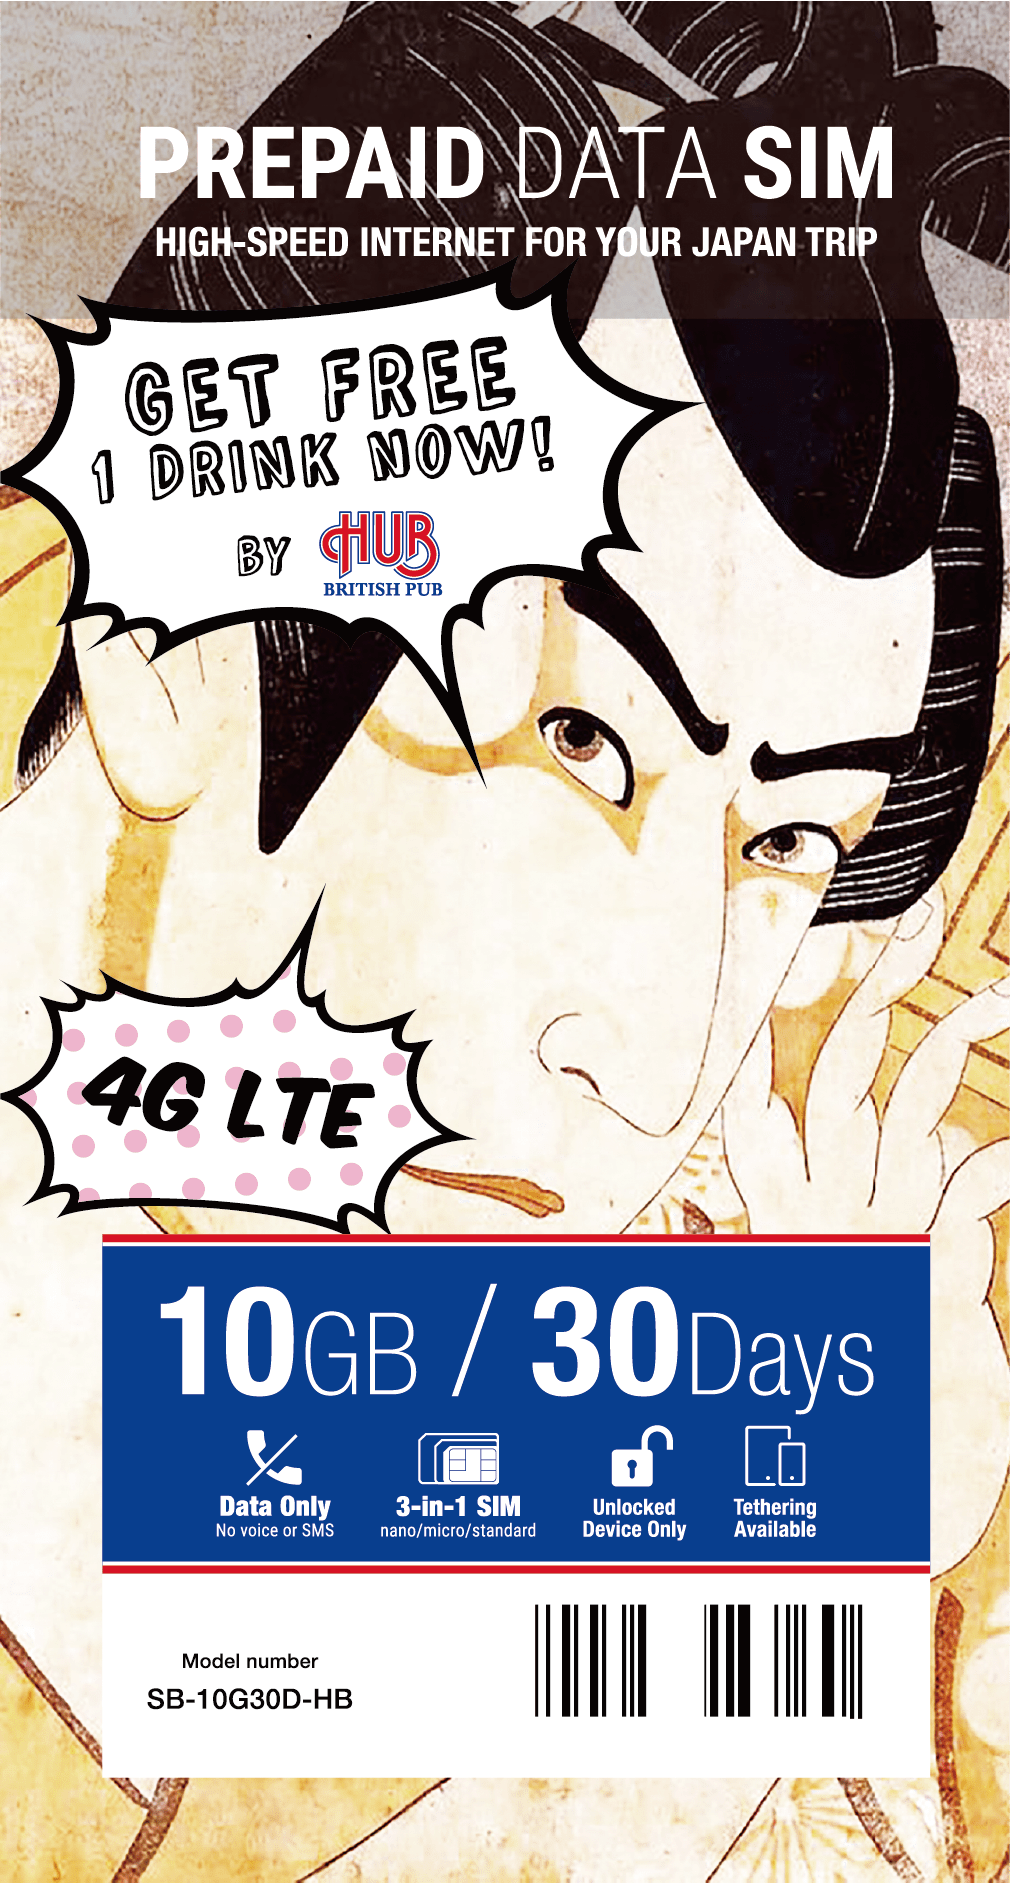 10GB for 30 Days